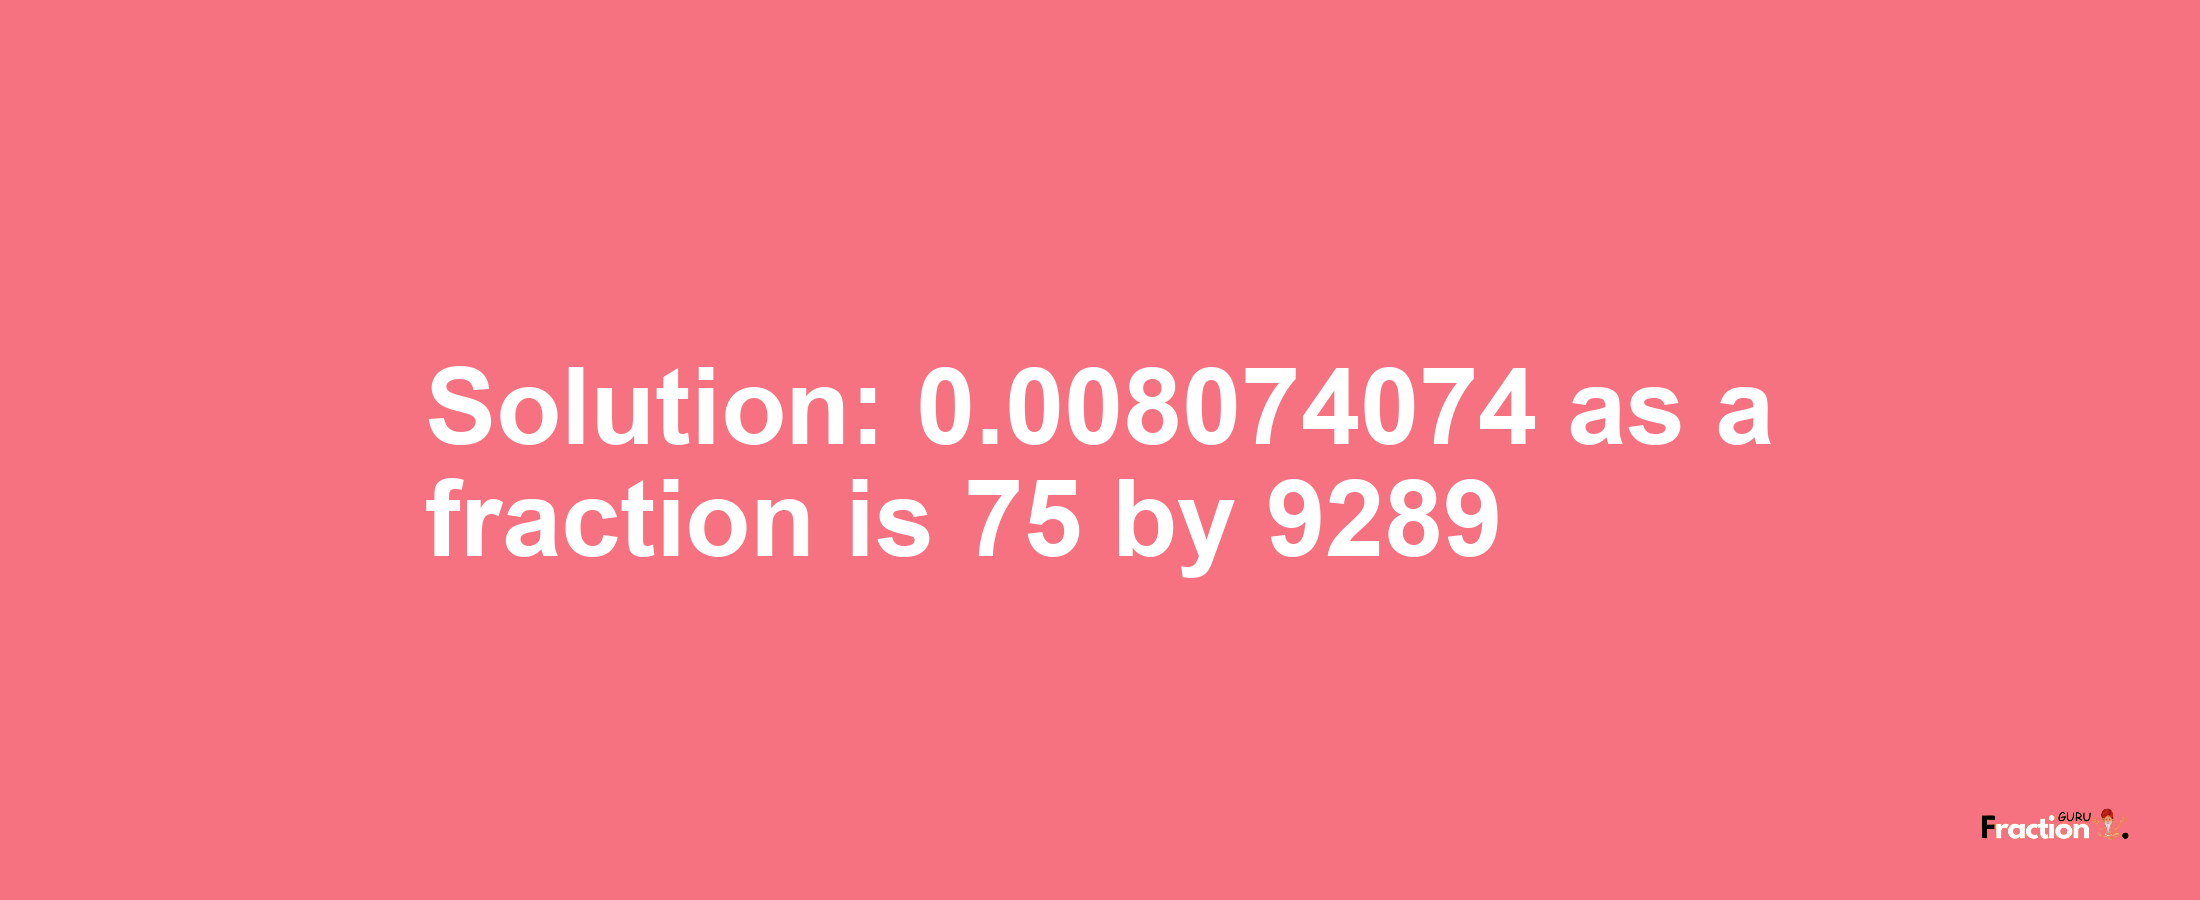 Solution:0.008074074 as a fraction is 75/9289